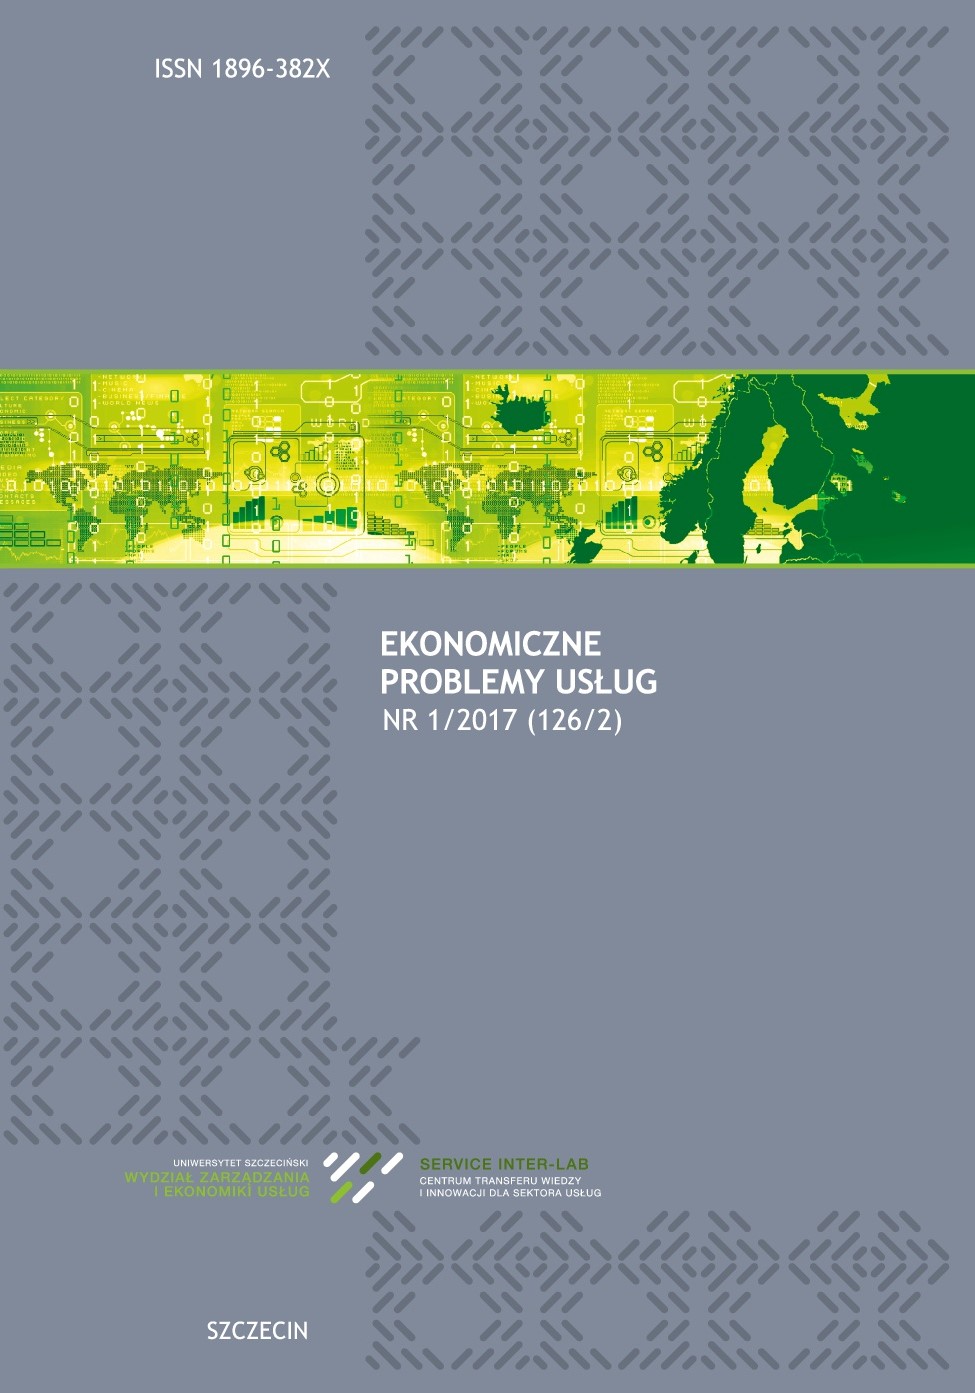 Text mining of articles in an issue of the journal „Economics and Computer Science" dedicated on the DIMBI project Cover Image